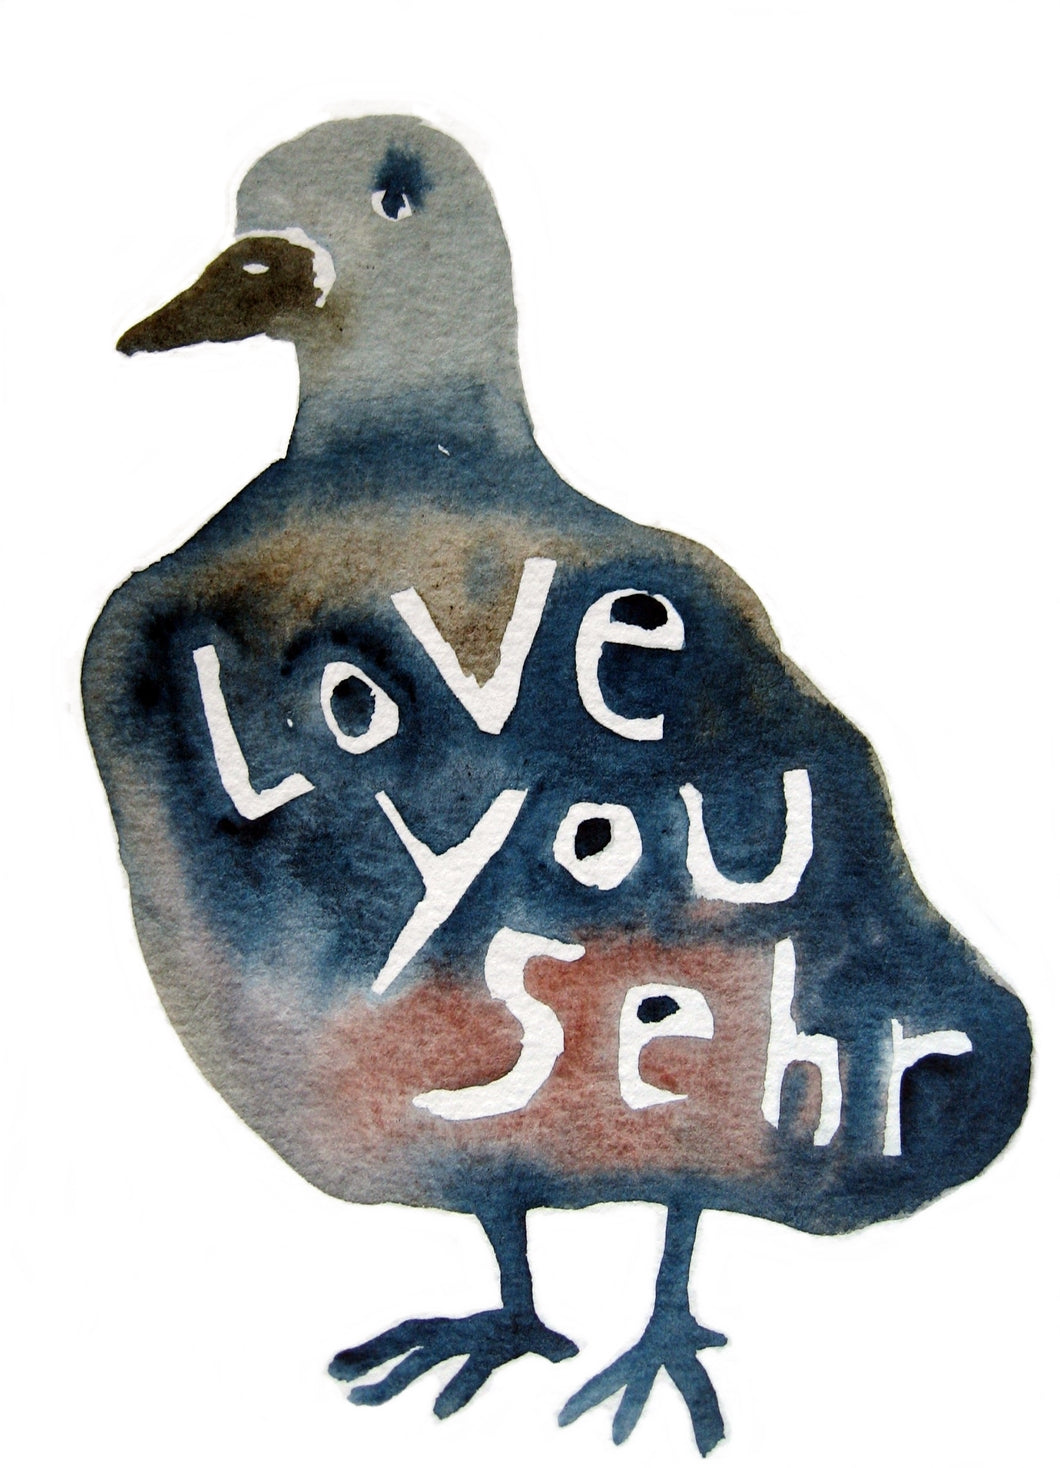 love you sehr print